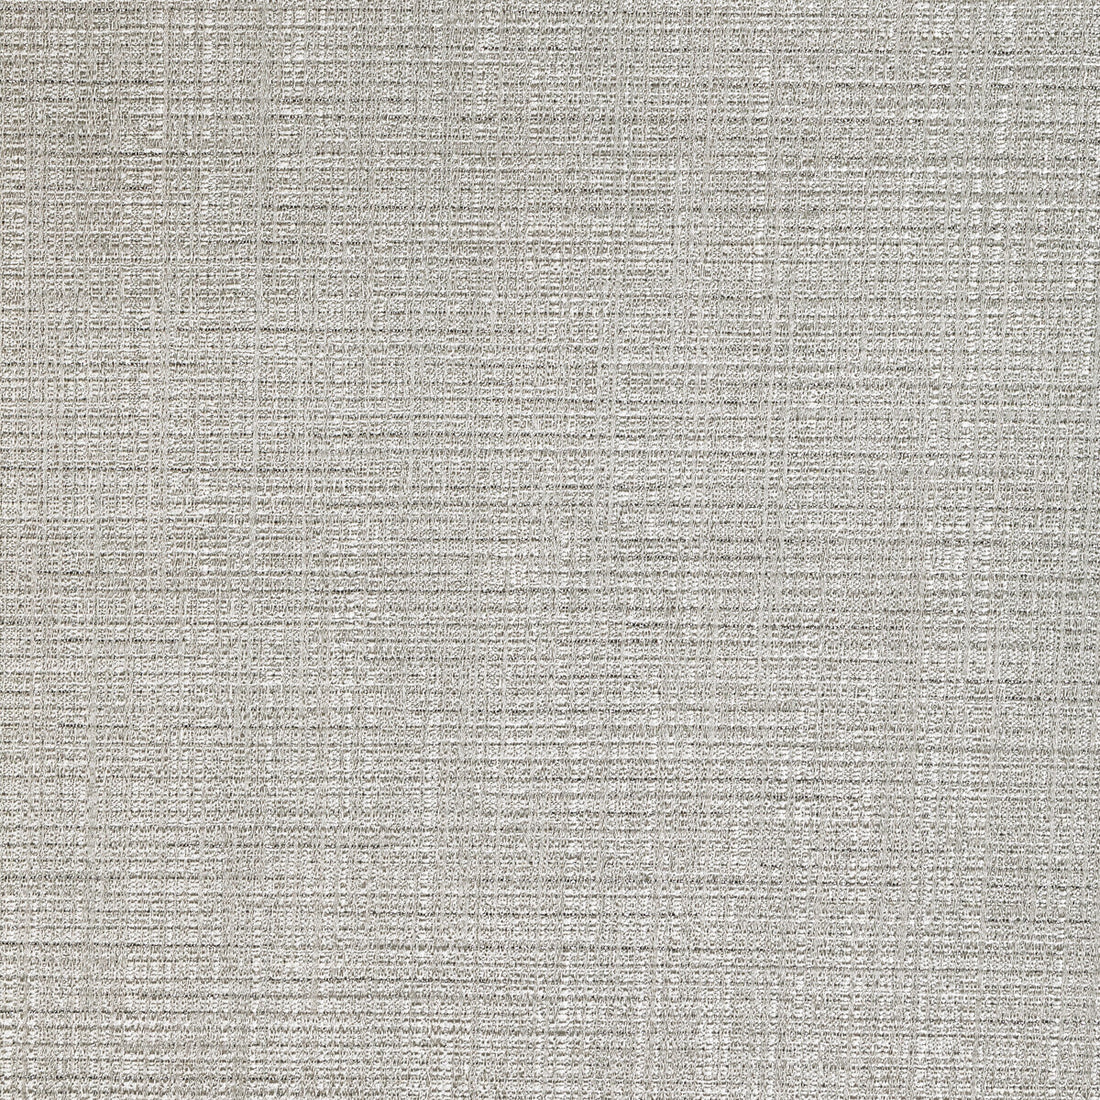 Soft Lights fabric in platinum color - pattern 36574.1621.0 - by Kravet Couture in the Modern Luxe Silk Luster collection